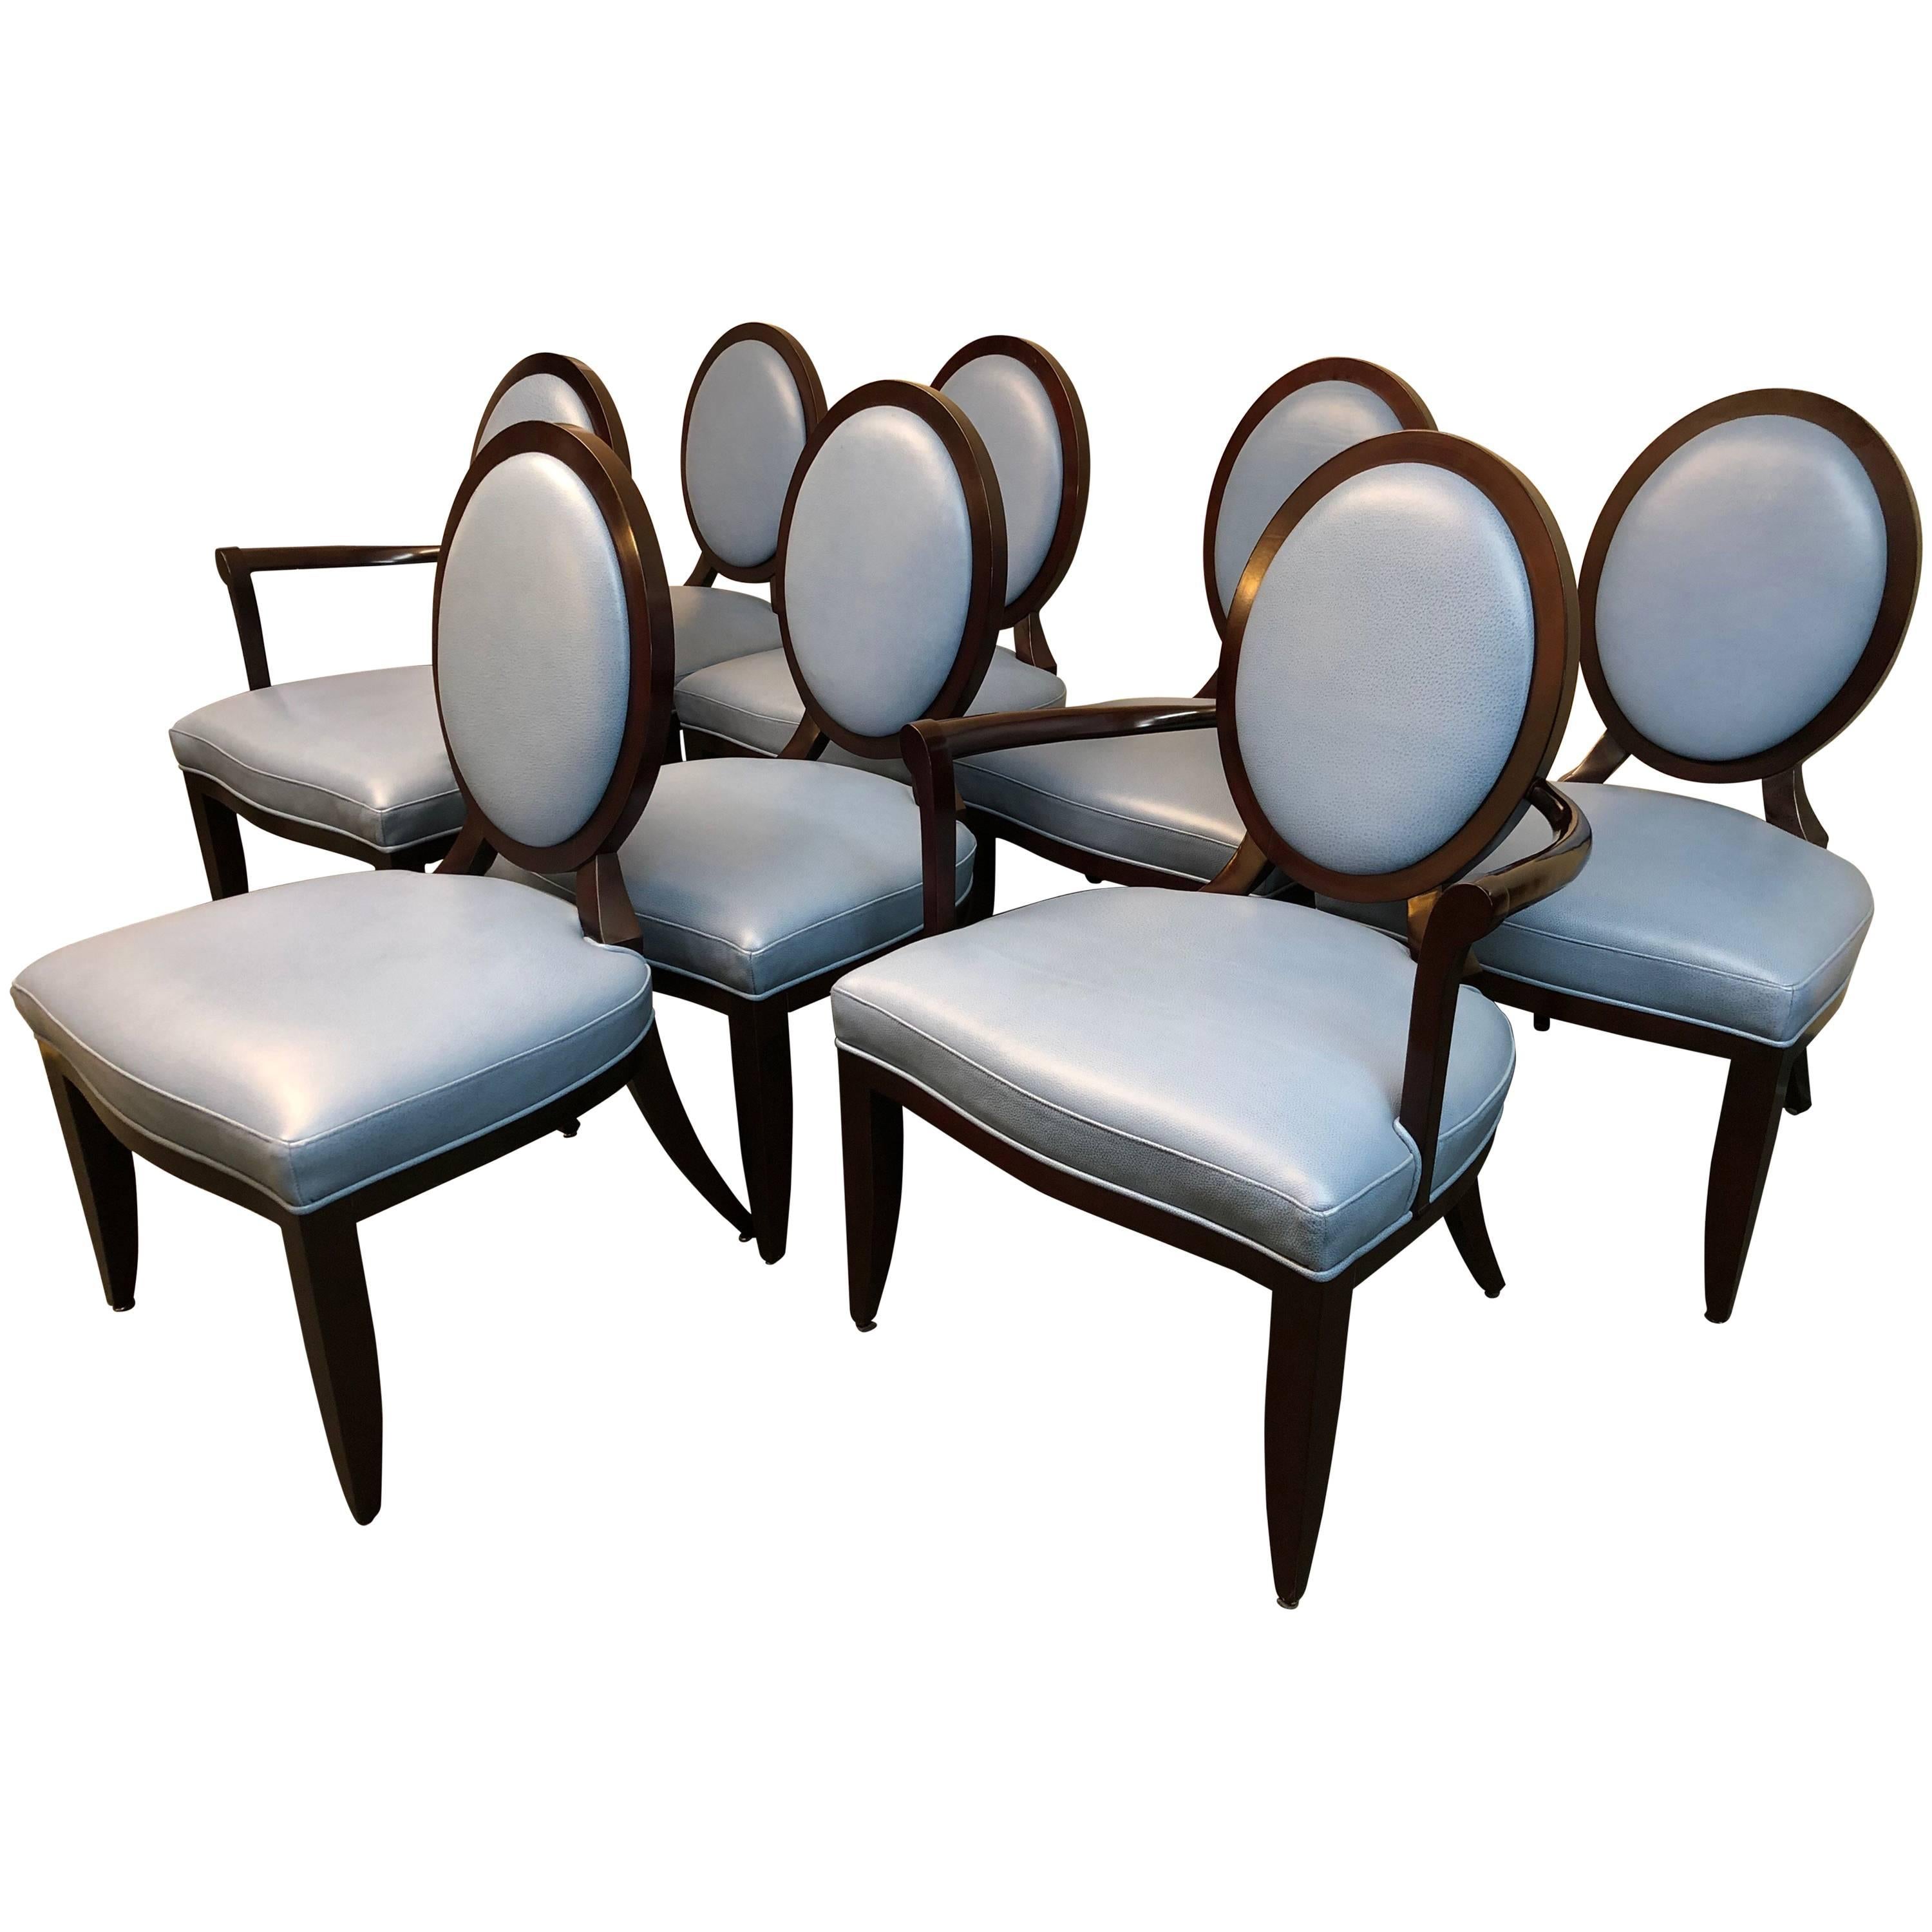 Set of Eight Baker Furniture Oval X-Back Barbara Barry Dining Chairs